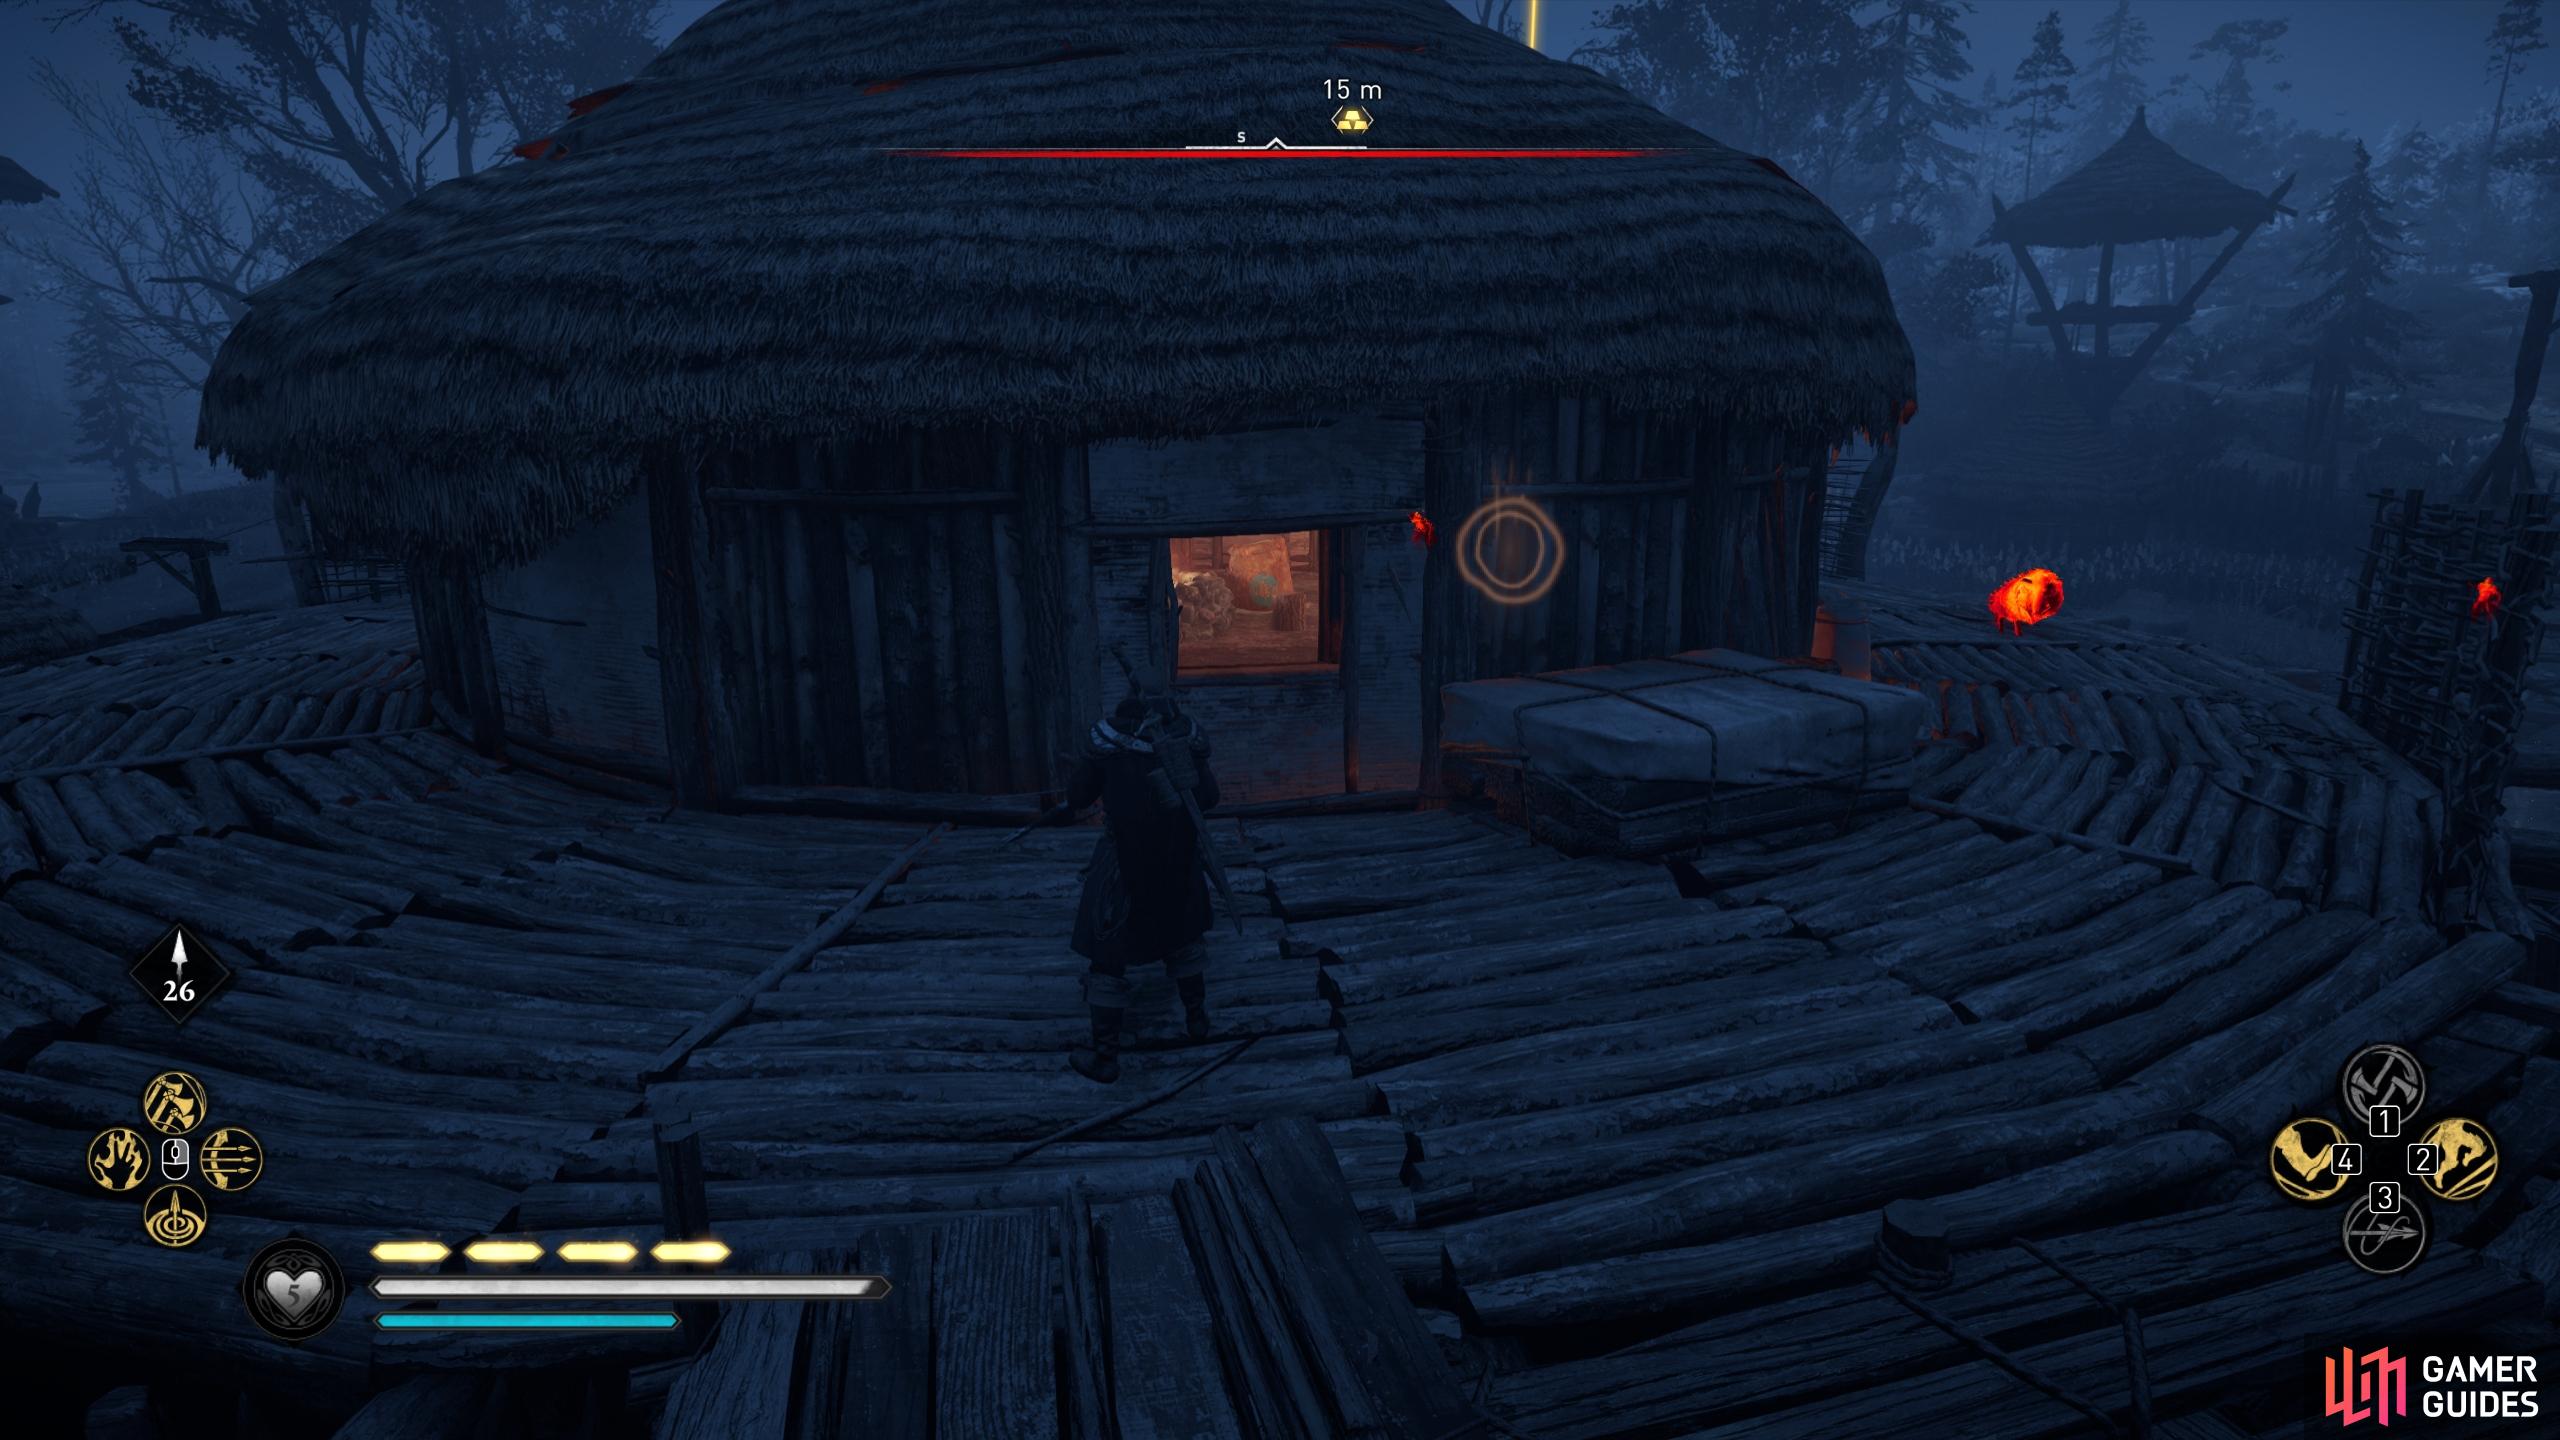 You can enter the roundhouse through an open window or by destroying the door.